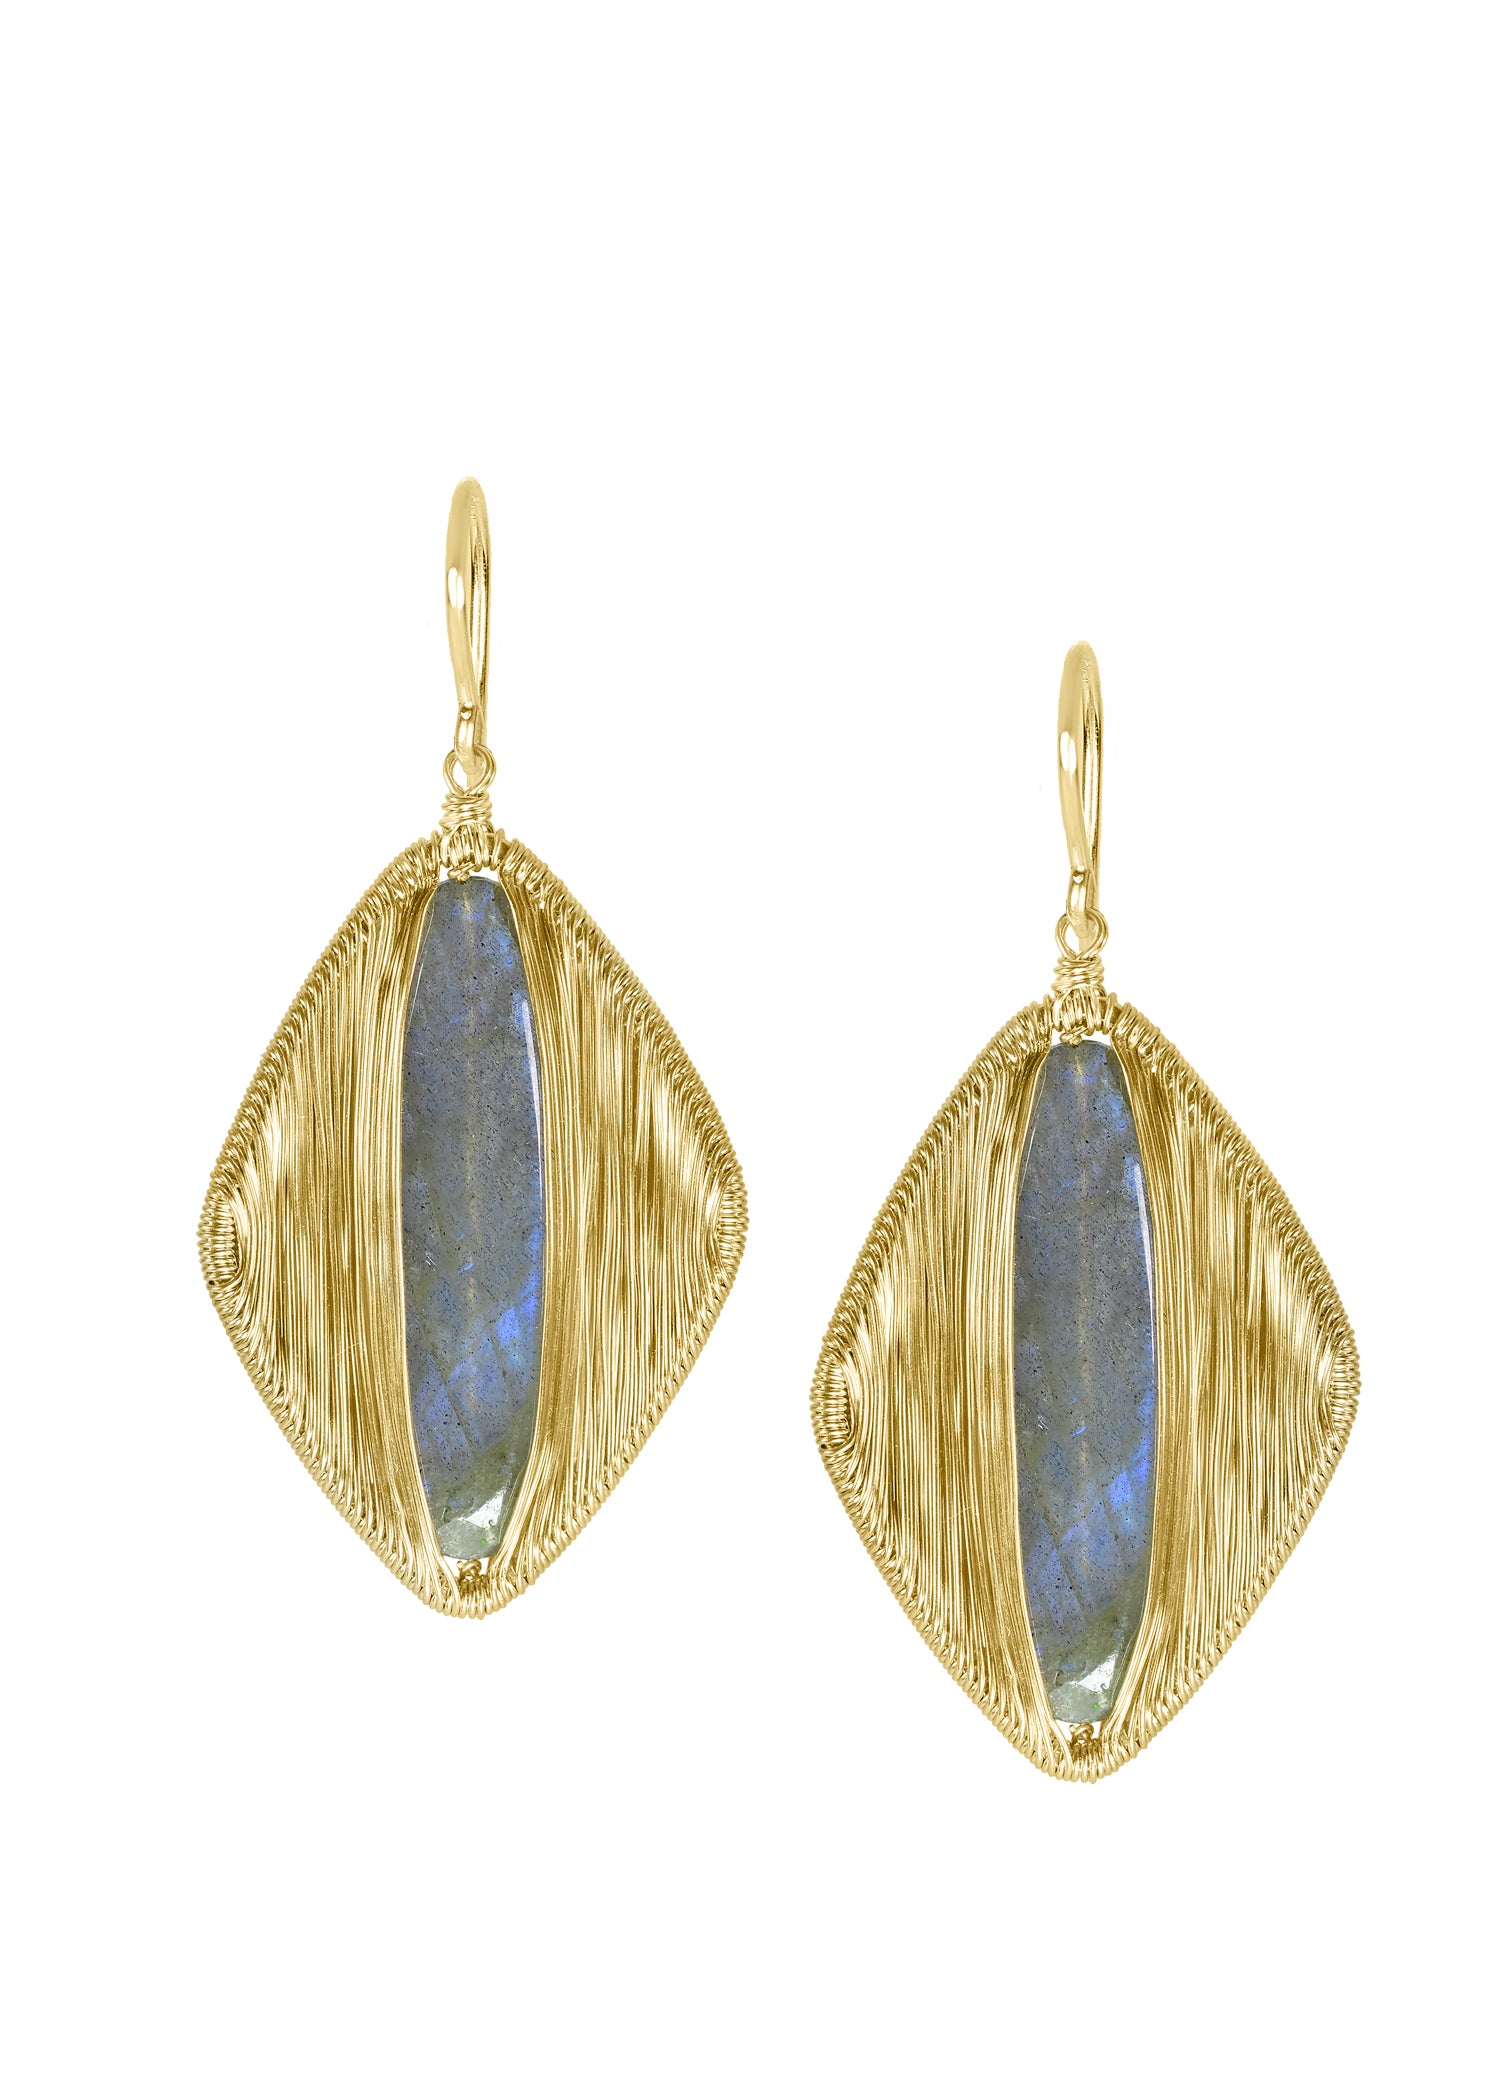 Labradorite 14k gold fill Earrings measure 1-11/16" in length (including the ear wires) and 7/8" in width at the widest point Handmade in our Los Angeles studio